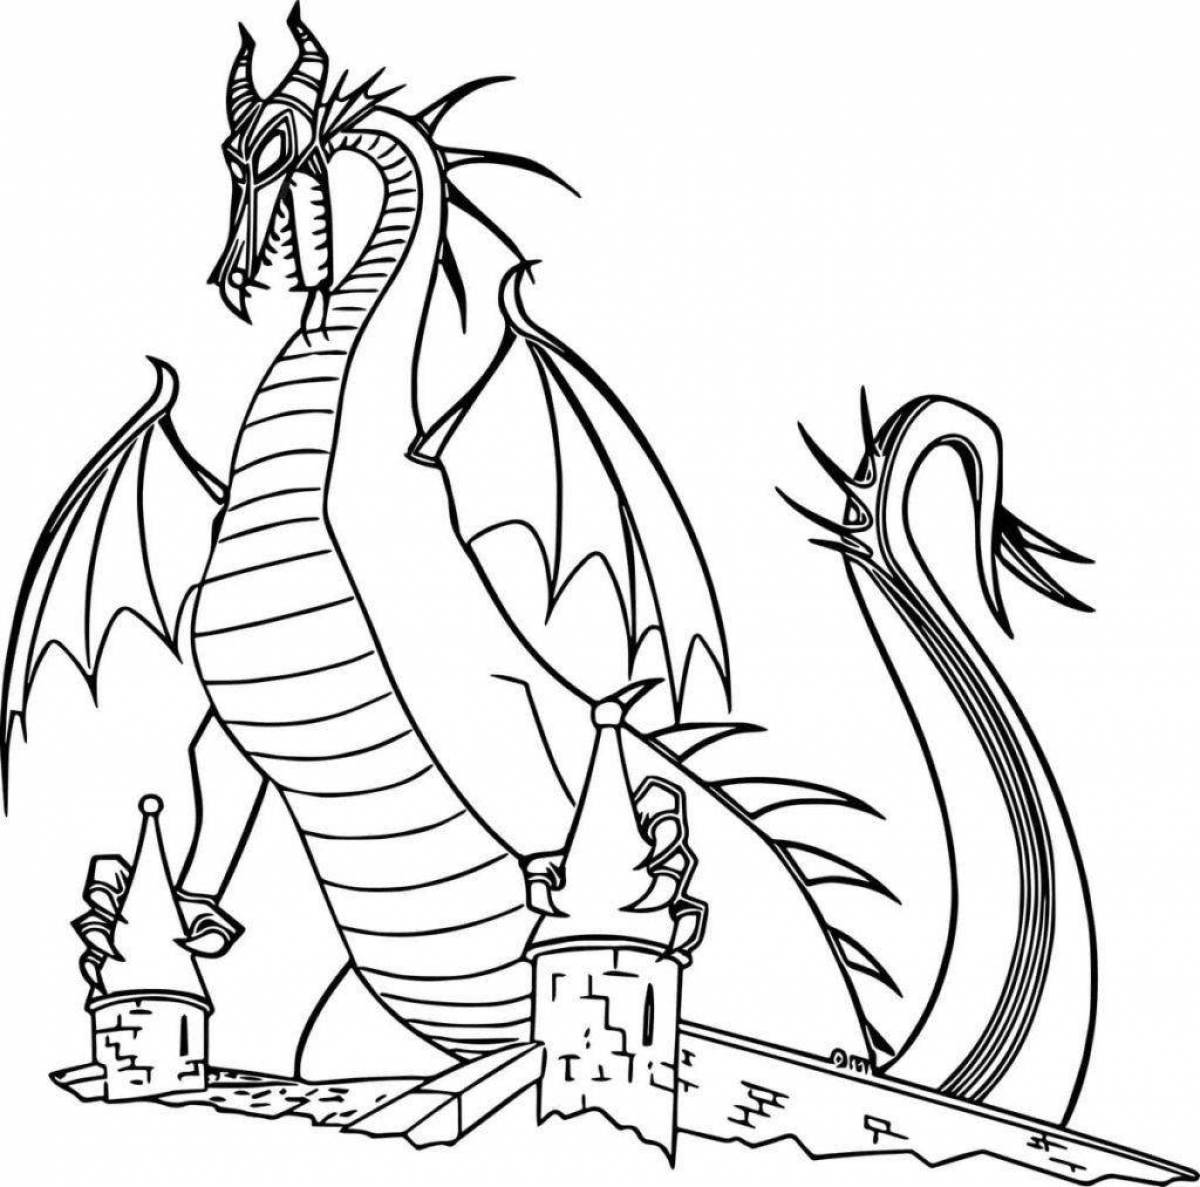 Impressive water dragon coloring page